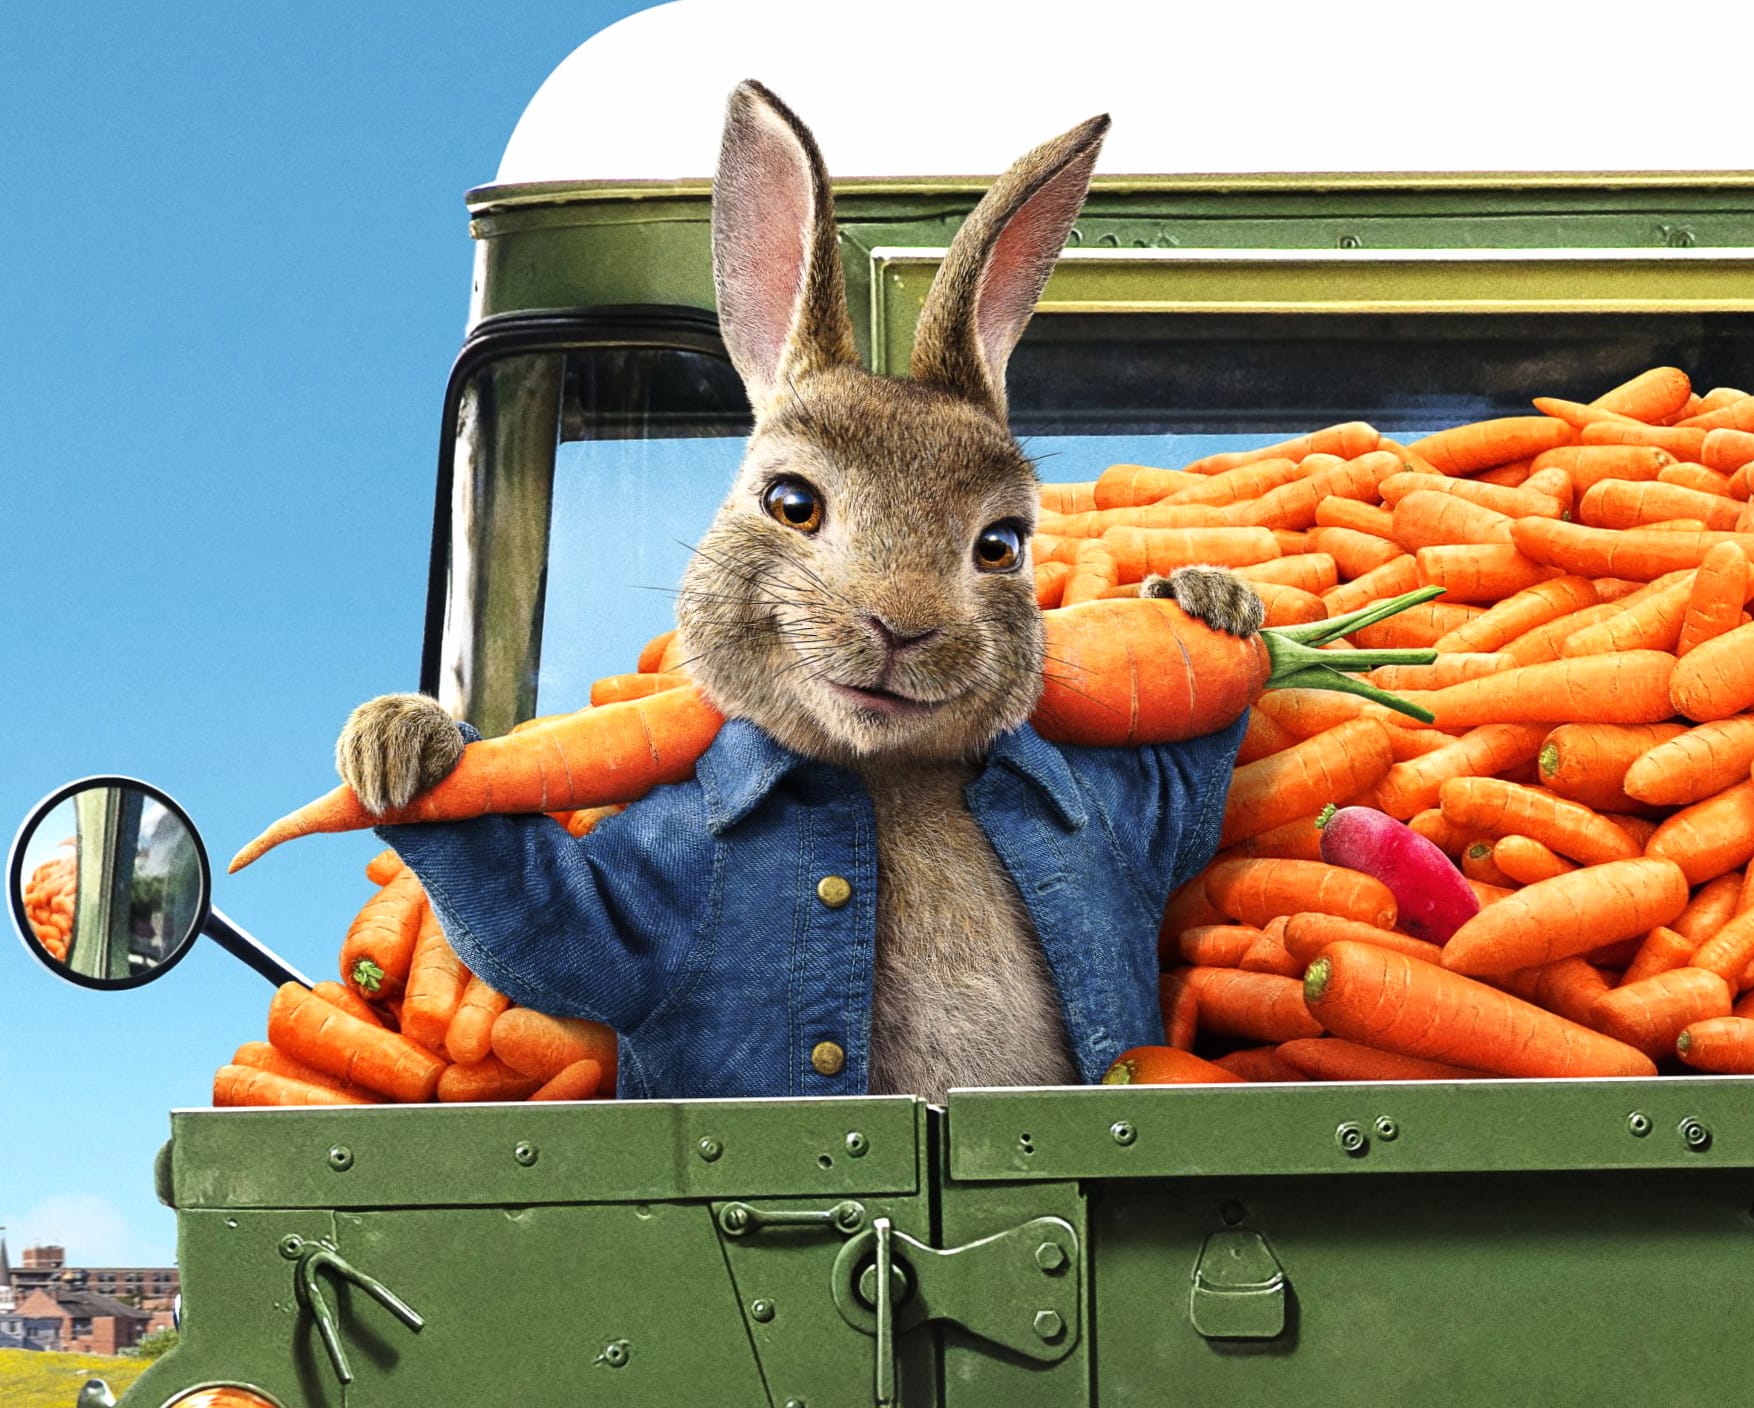 Peter Rabbit 2 The Runaway wallpapers HD quality